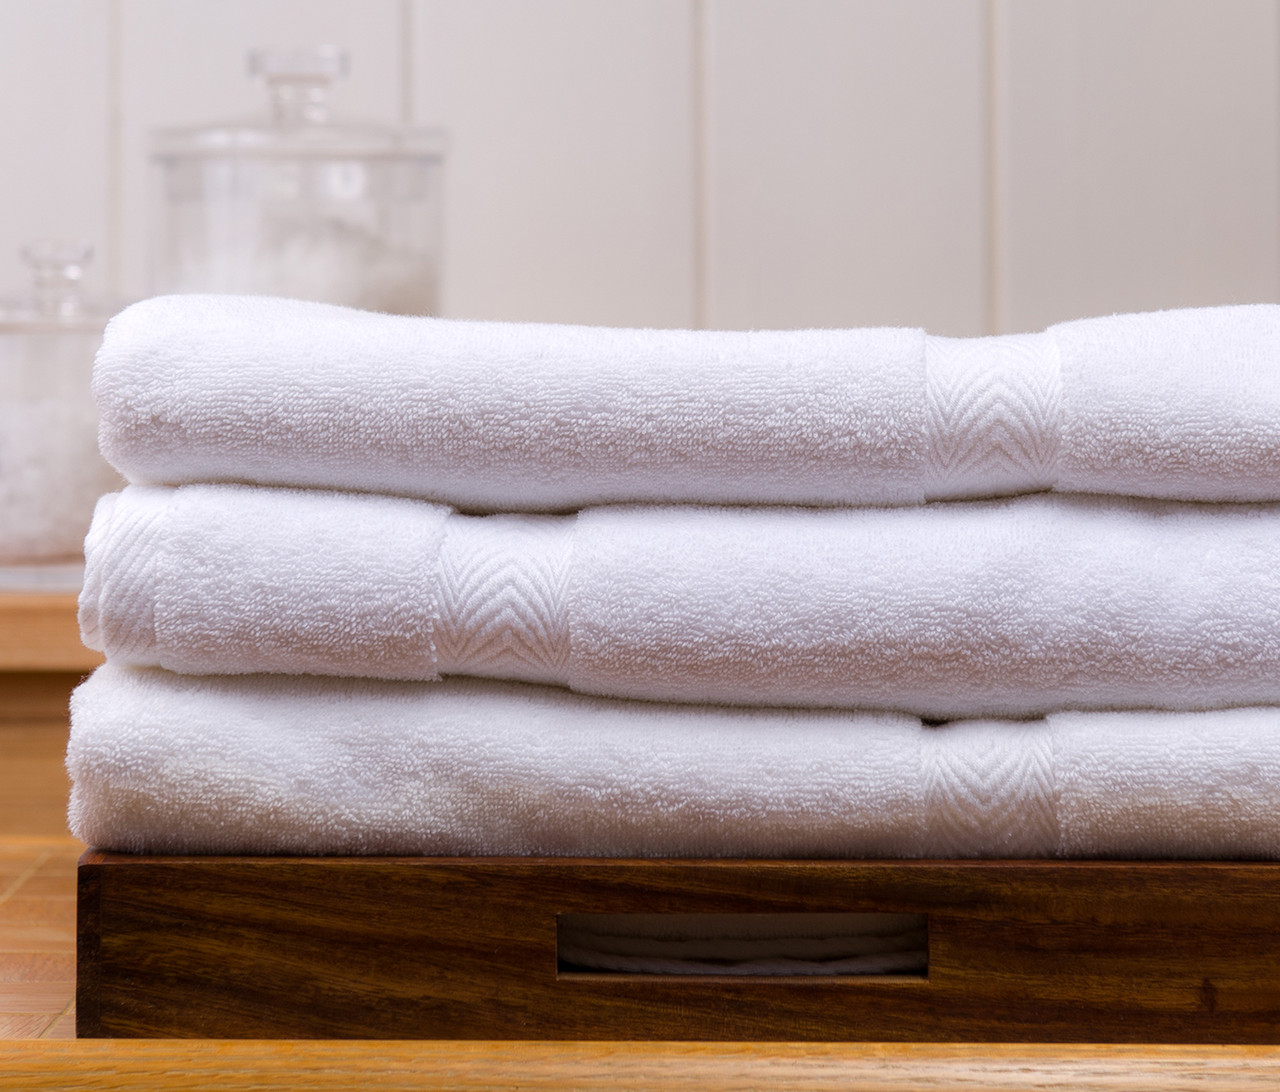 Three folded white towels on a wooden tray